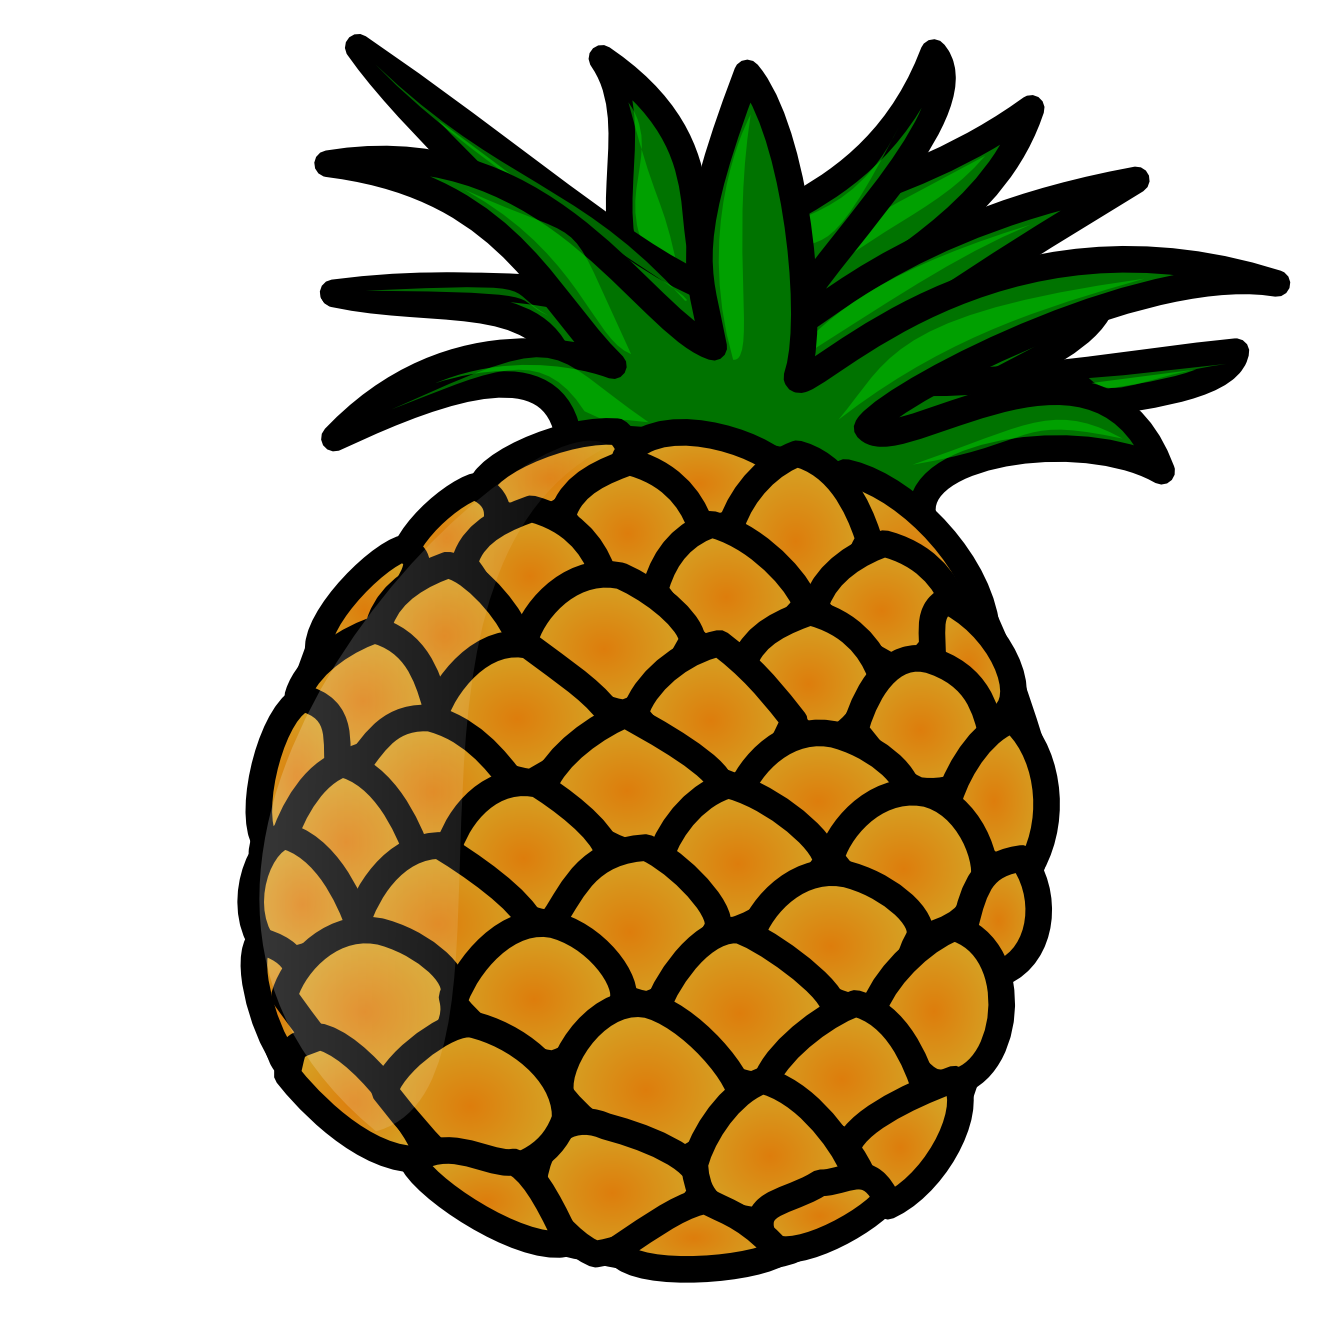 Pineapple Clip Art Free - Free Clipart Images